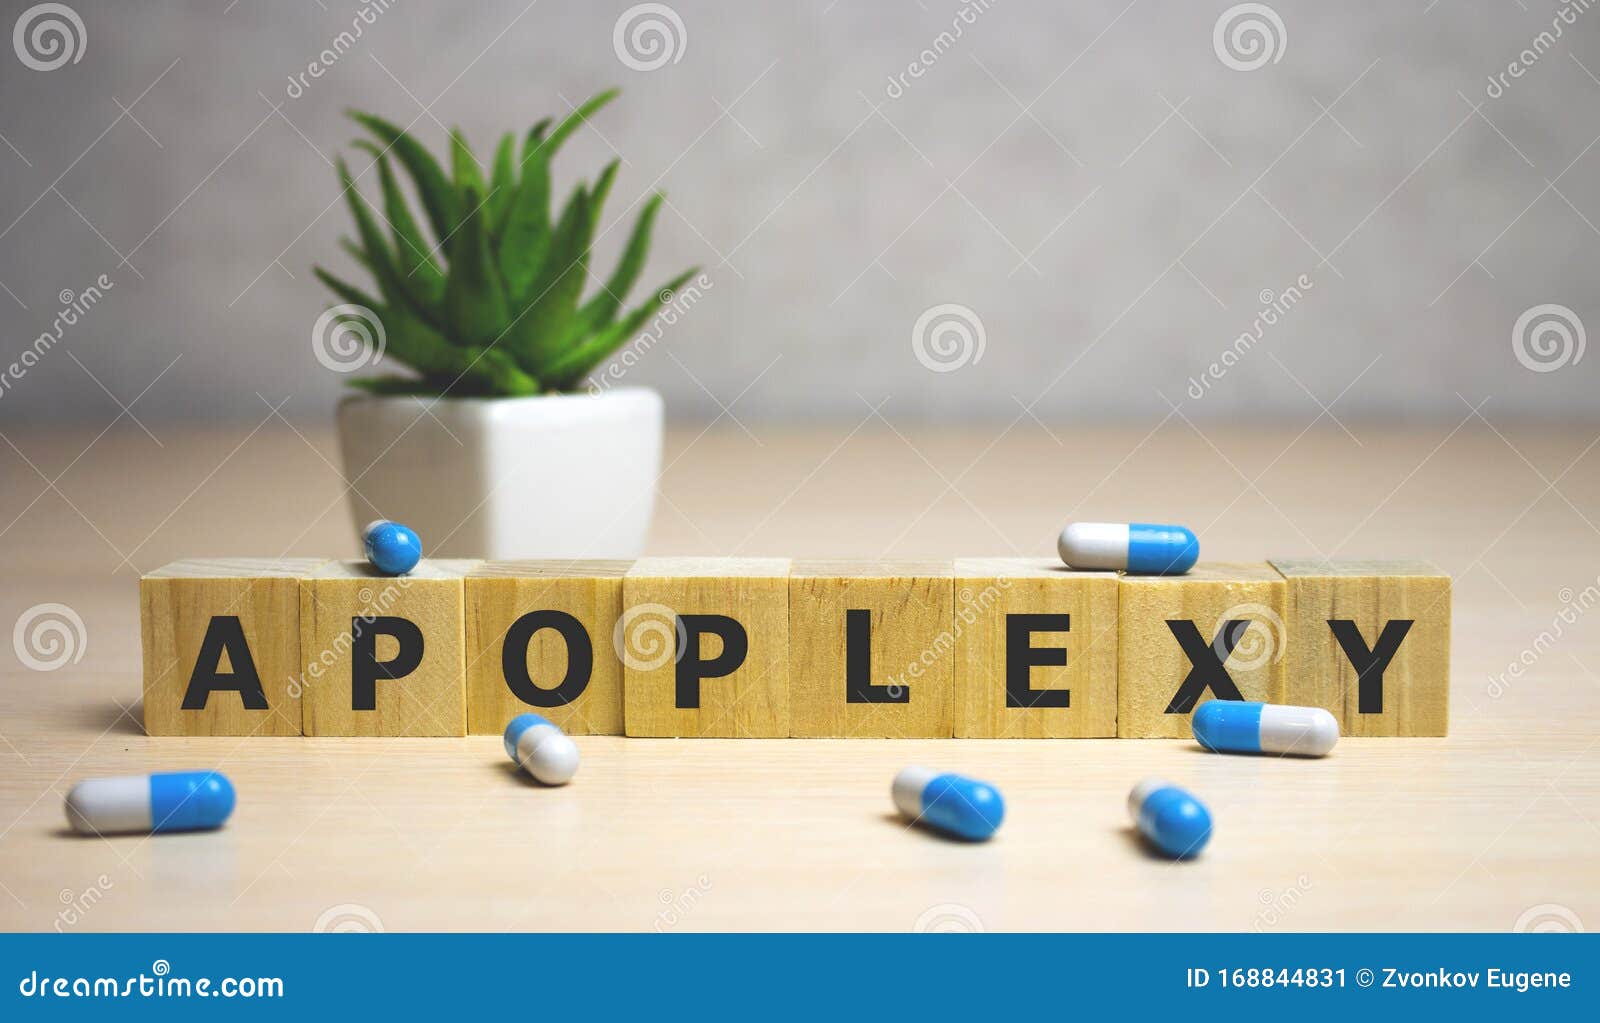 apoplexy word made with building blocks. medical concept.